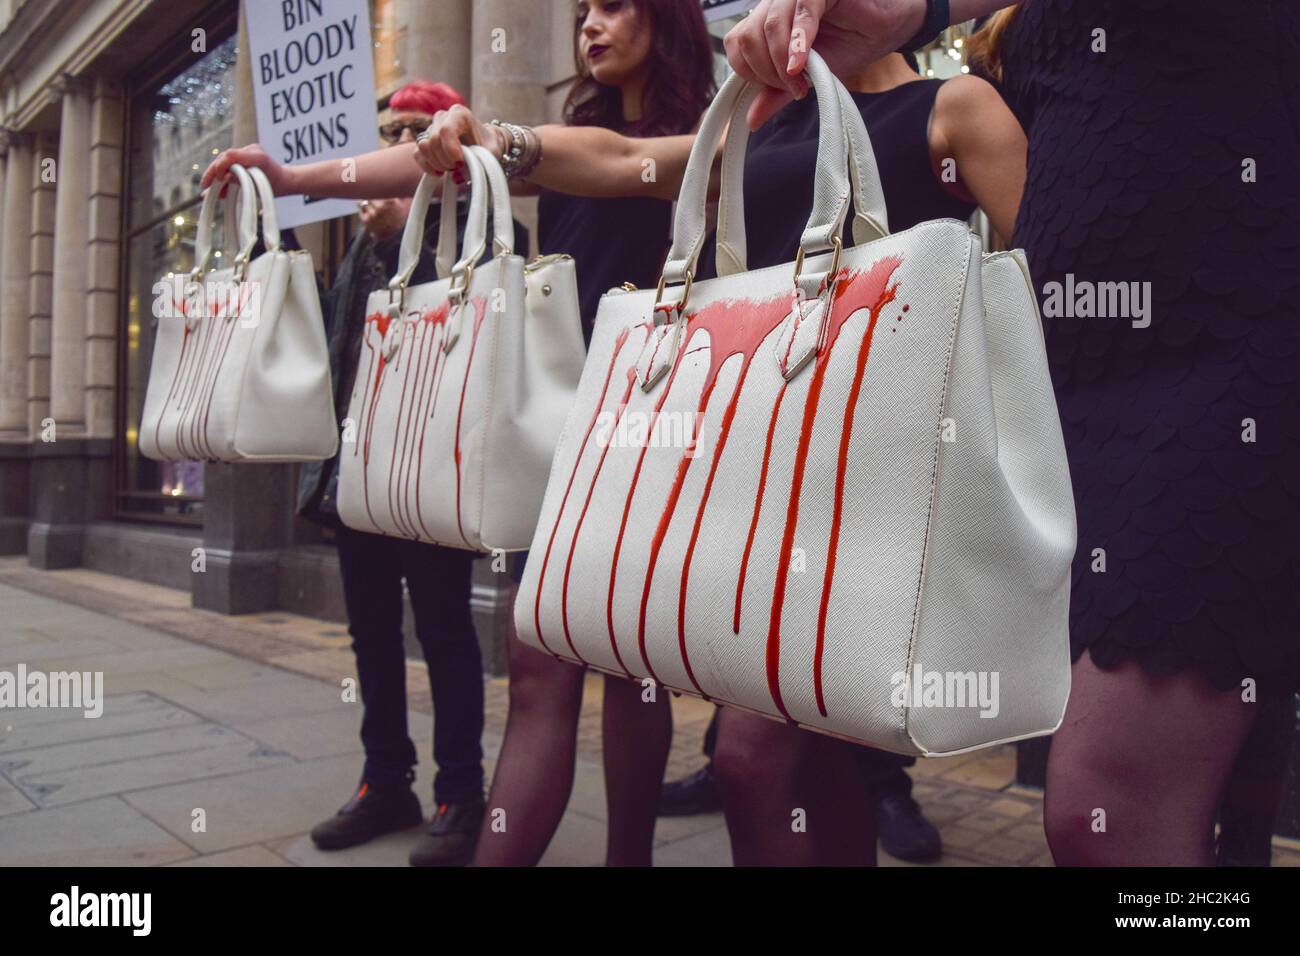 Activists hold handbags splashed with fake blood during the protest.PETA  (People for the Ethical Treatment of Animals) activists gathered outside  the Gucci store on Bond Street and staged a 'catwalk' with handbags